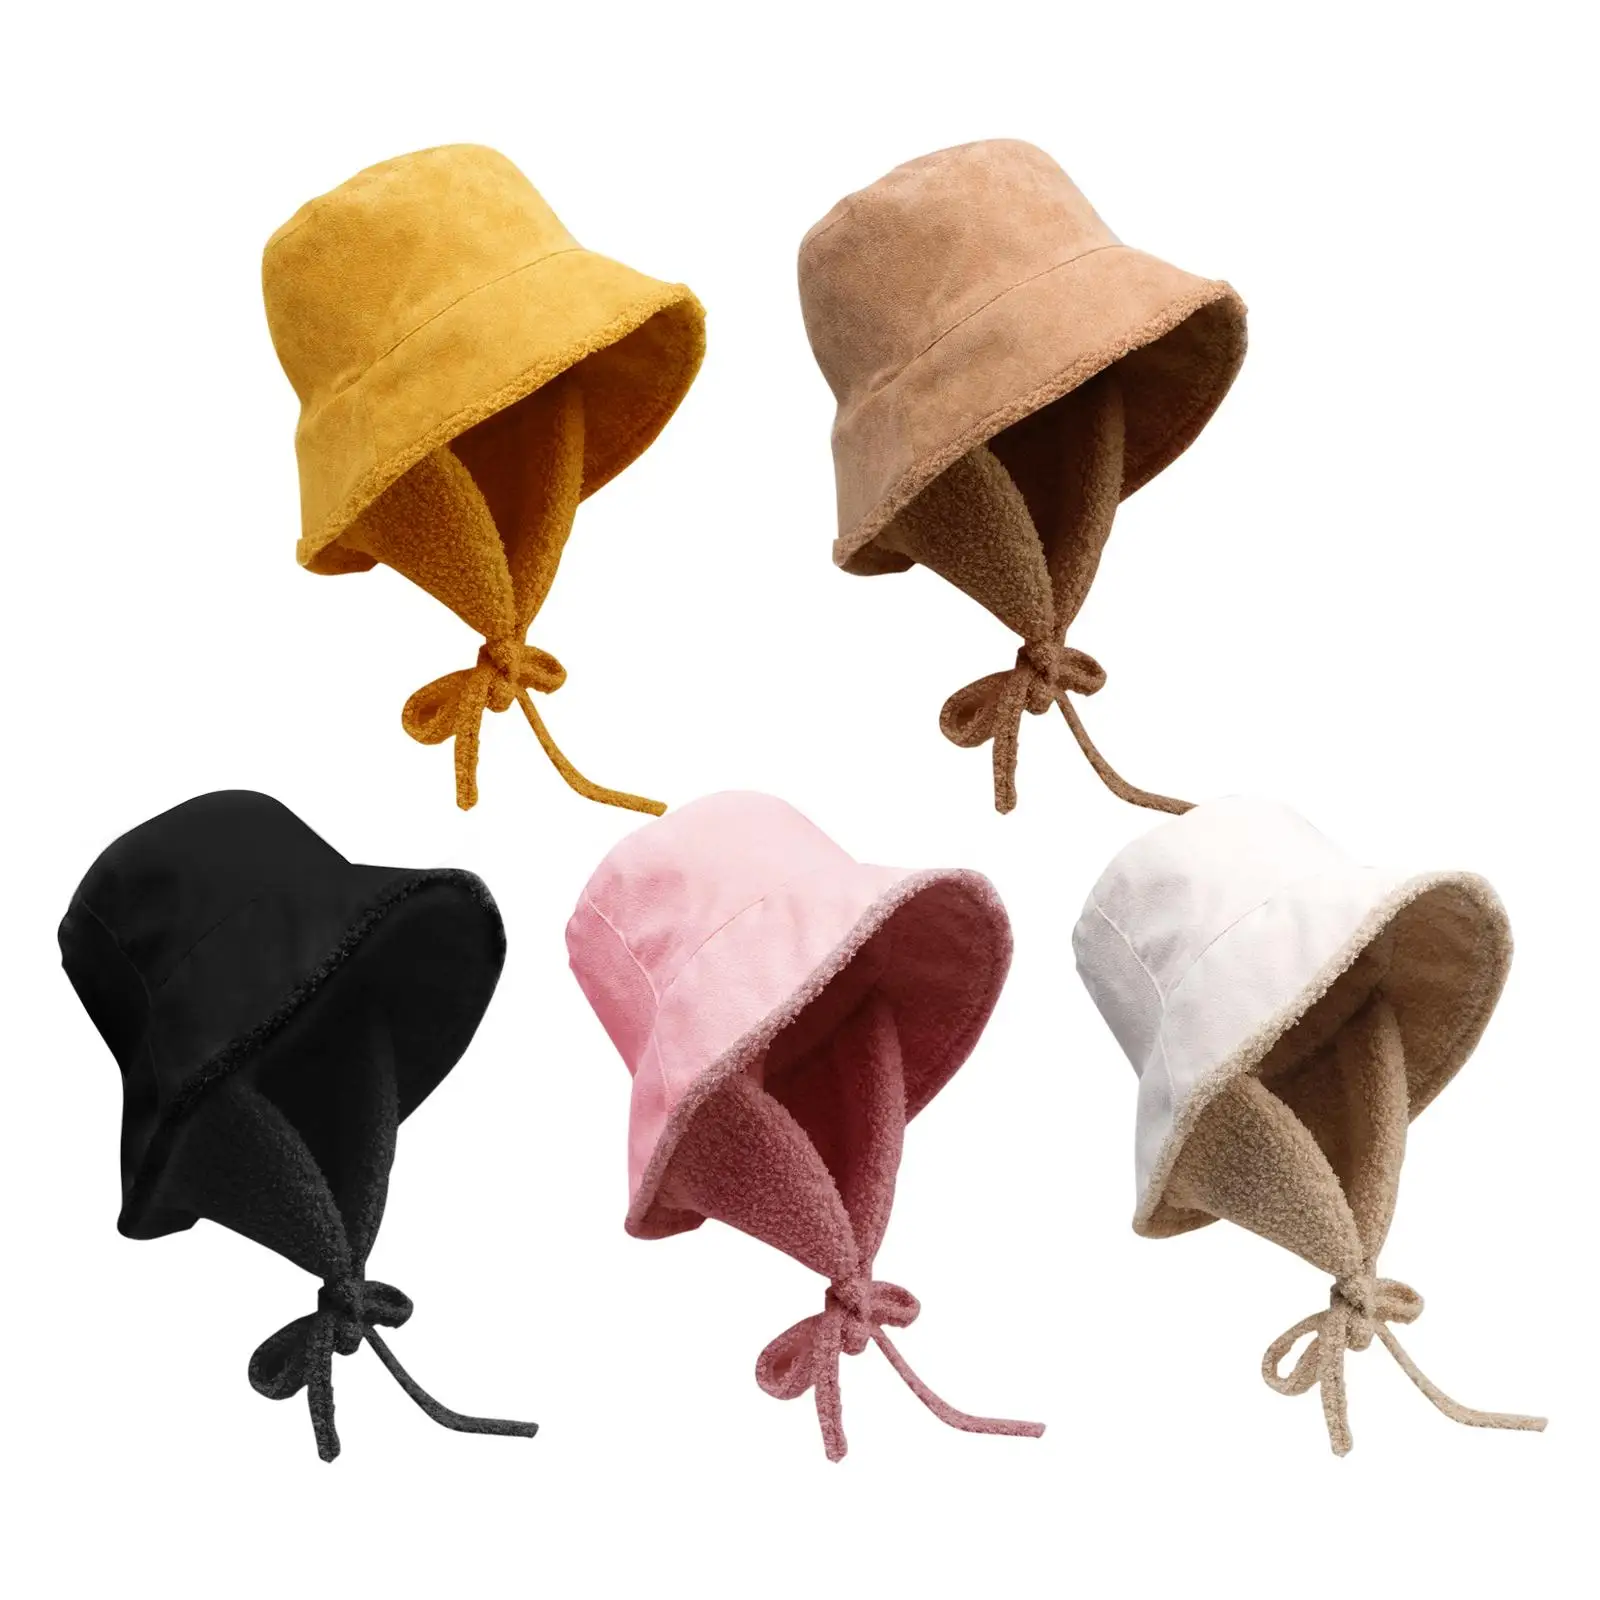 Warm Bucket Hat Soft with Ear Protection Fisherman Caps Furry Casual Winter Hat for Boys Girls Teens Travel Picnic Hiking